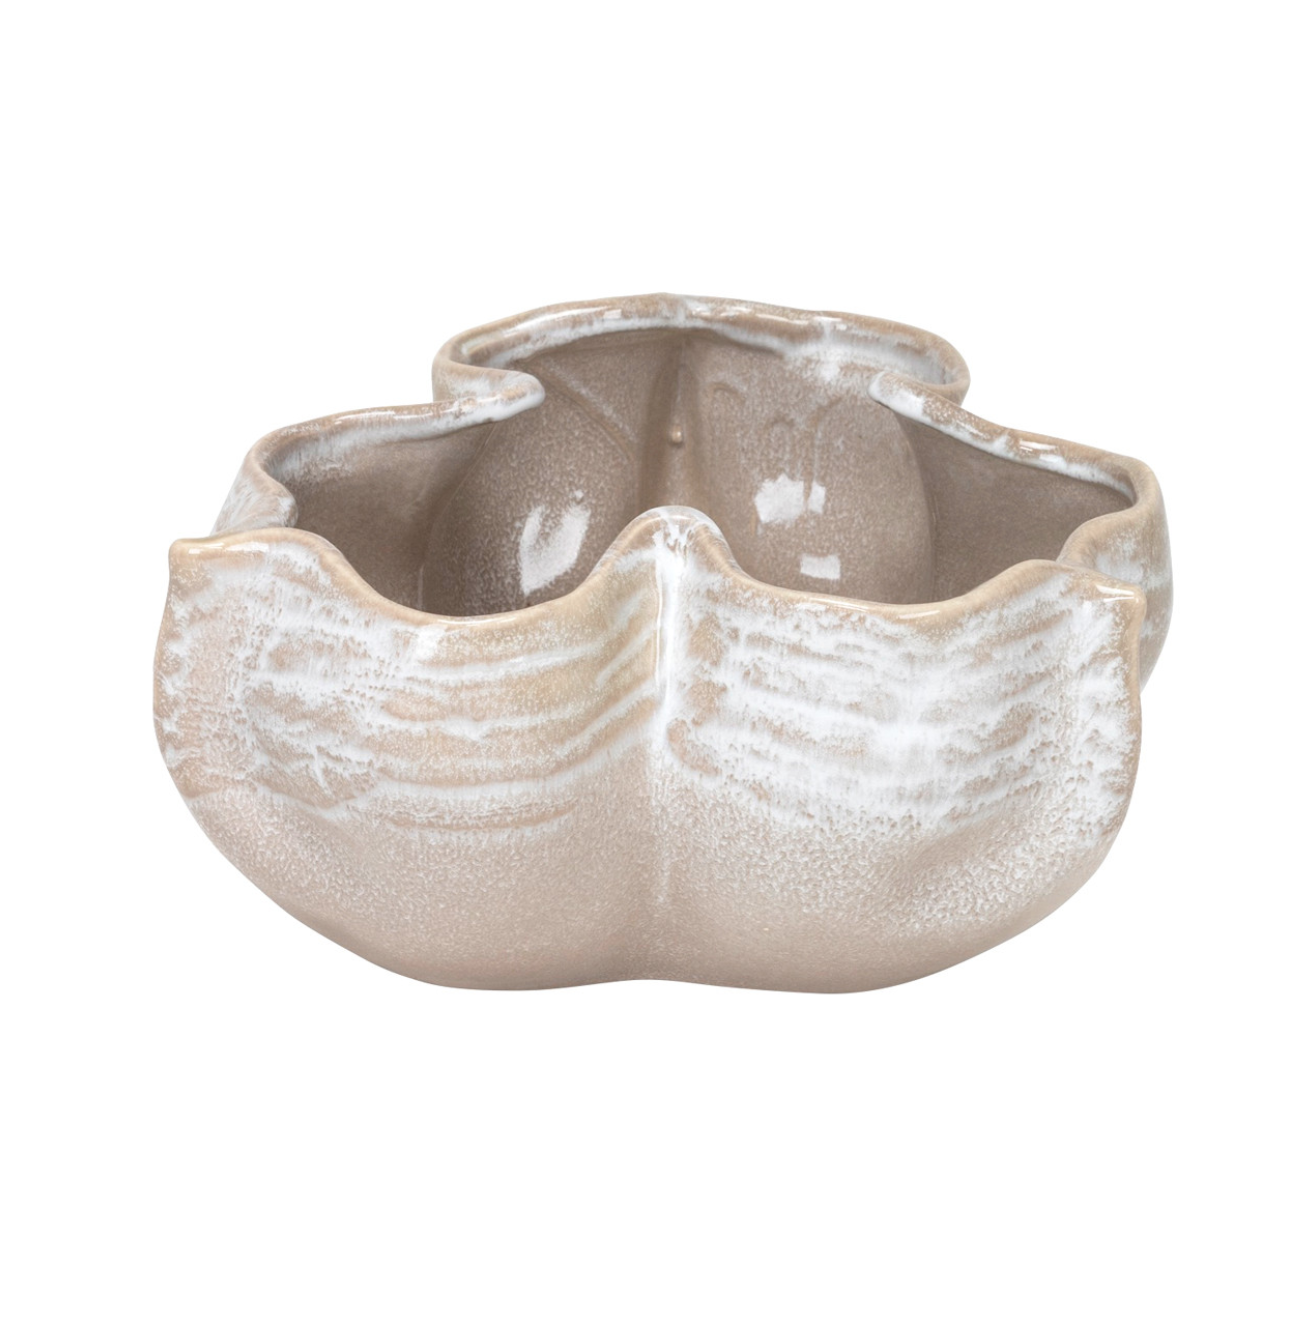 A Hadley Bowl from The Import Collection shaped like a flower with petal-like edges, in a neutral beige tone with textured white glaze on the rims, reminiscent of Scottsdale Arizona's desert hues, isolated on a white background.